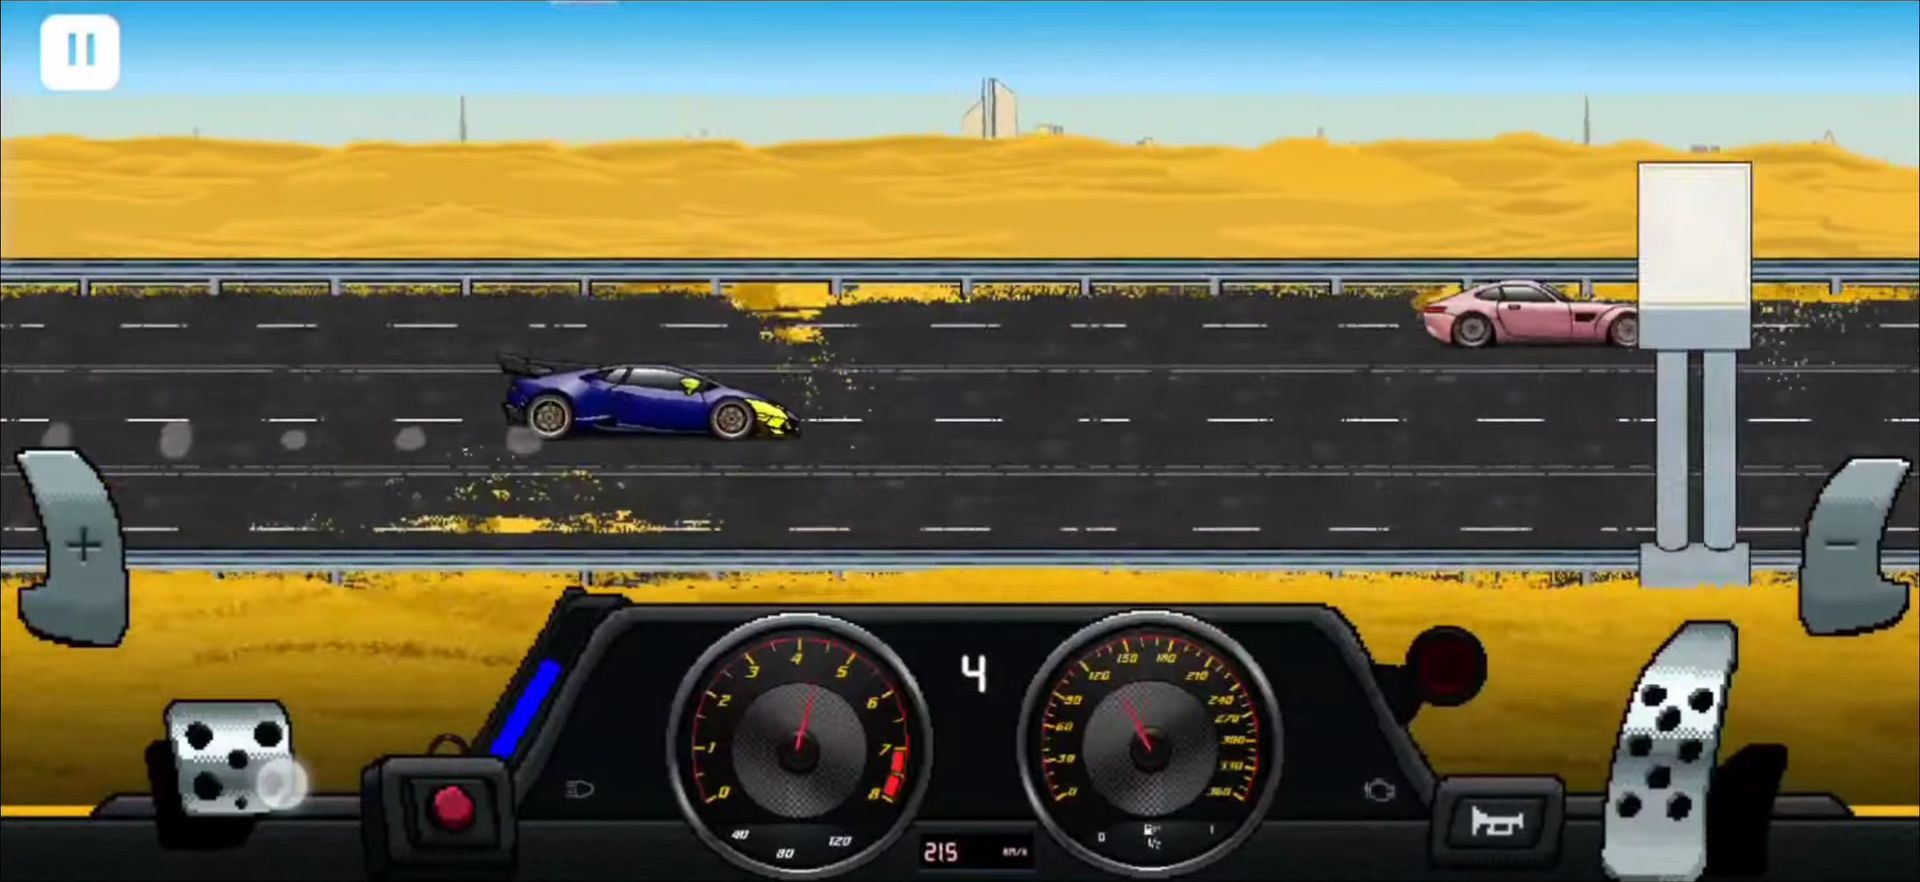 Pixel X Racer - Android game screenshots.